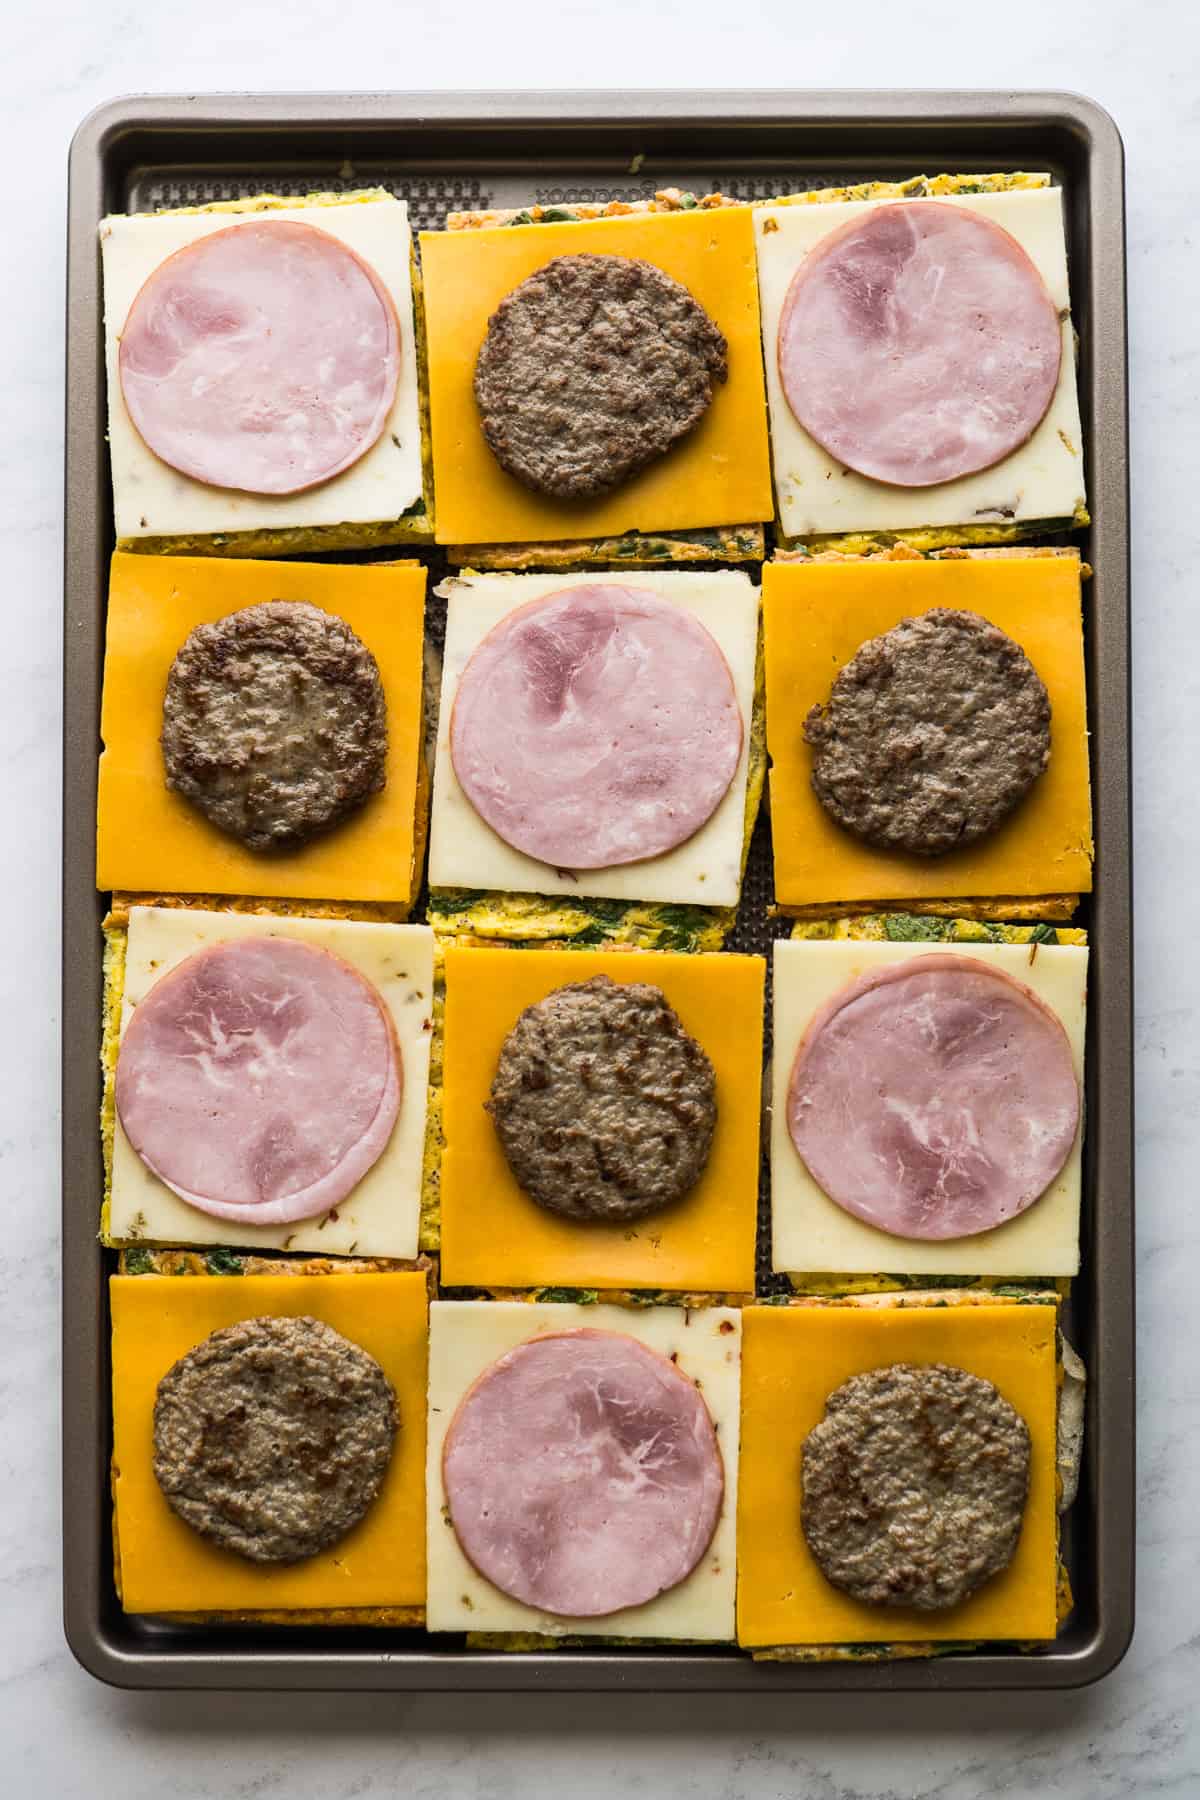 12 English muffins on a sheet pan topped with slices of baked eggs, cheese, and Canadian bacon and sausage.